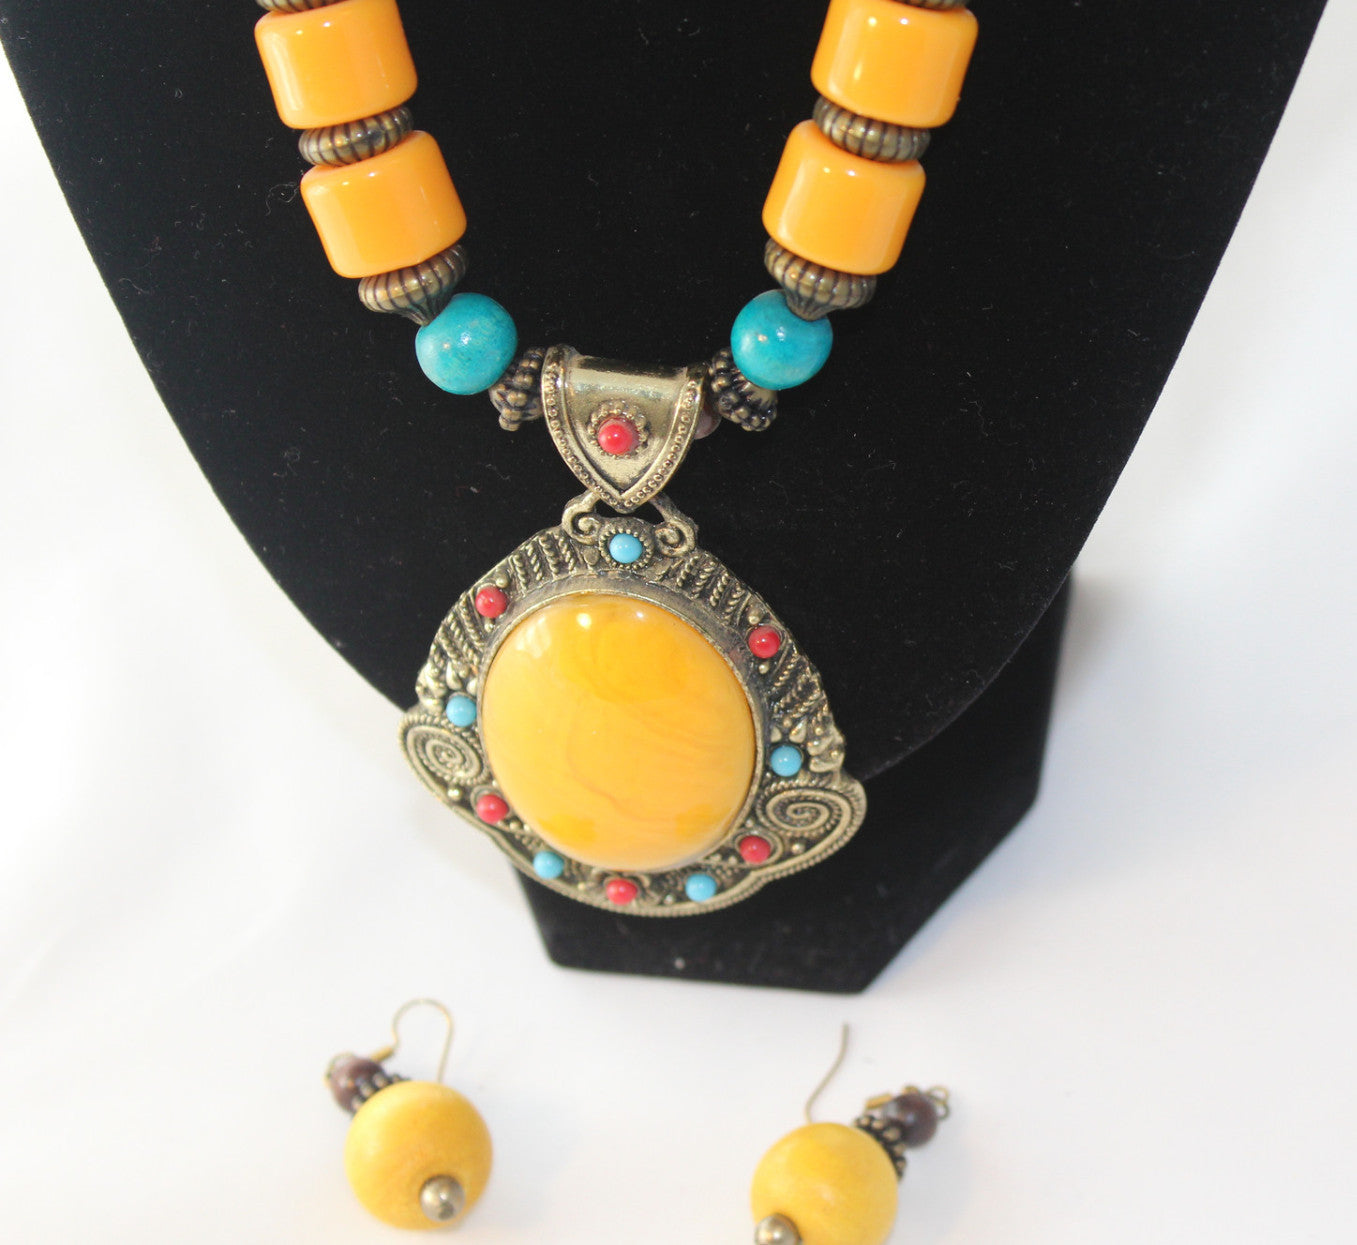 Colorful Tribal Bronze Bead Necklace with Yellow Oval Pendant and Earrings - Nubian Goods